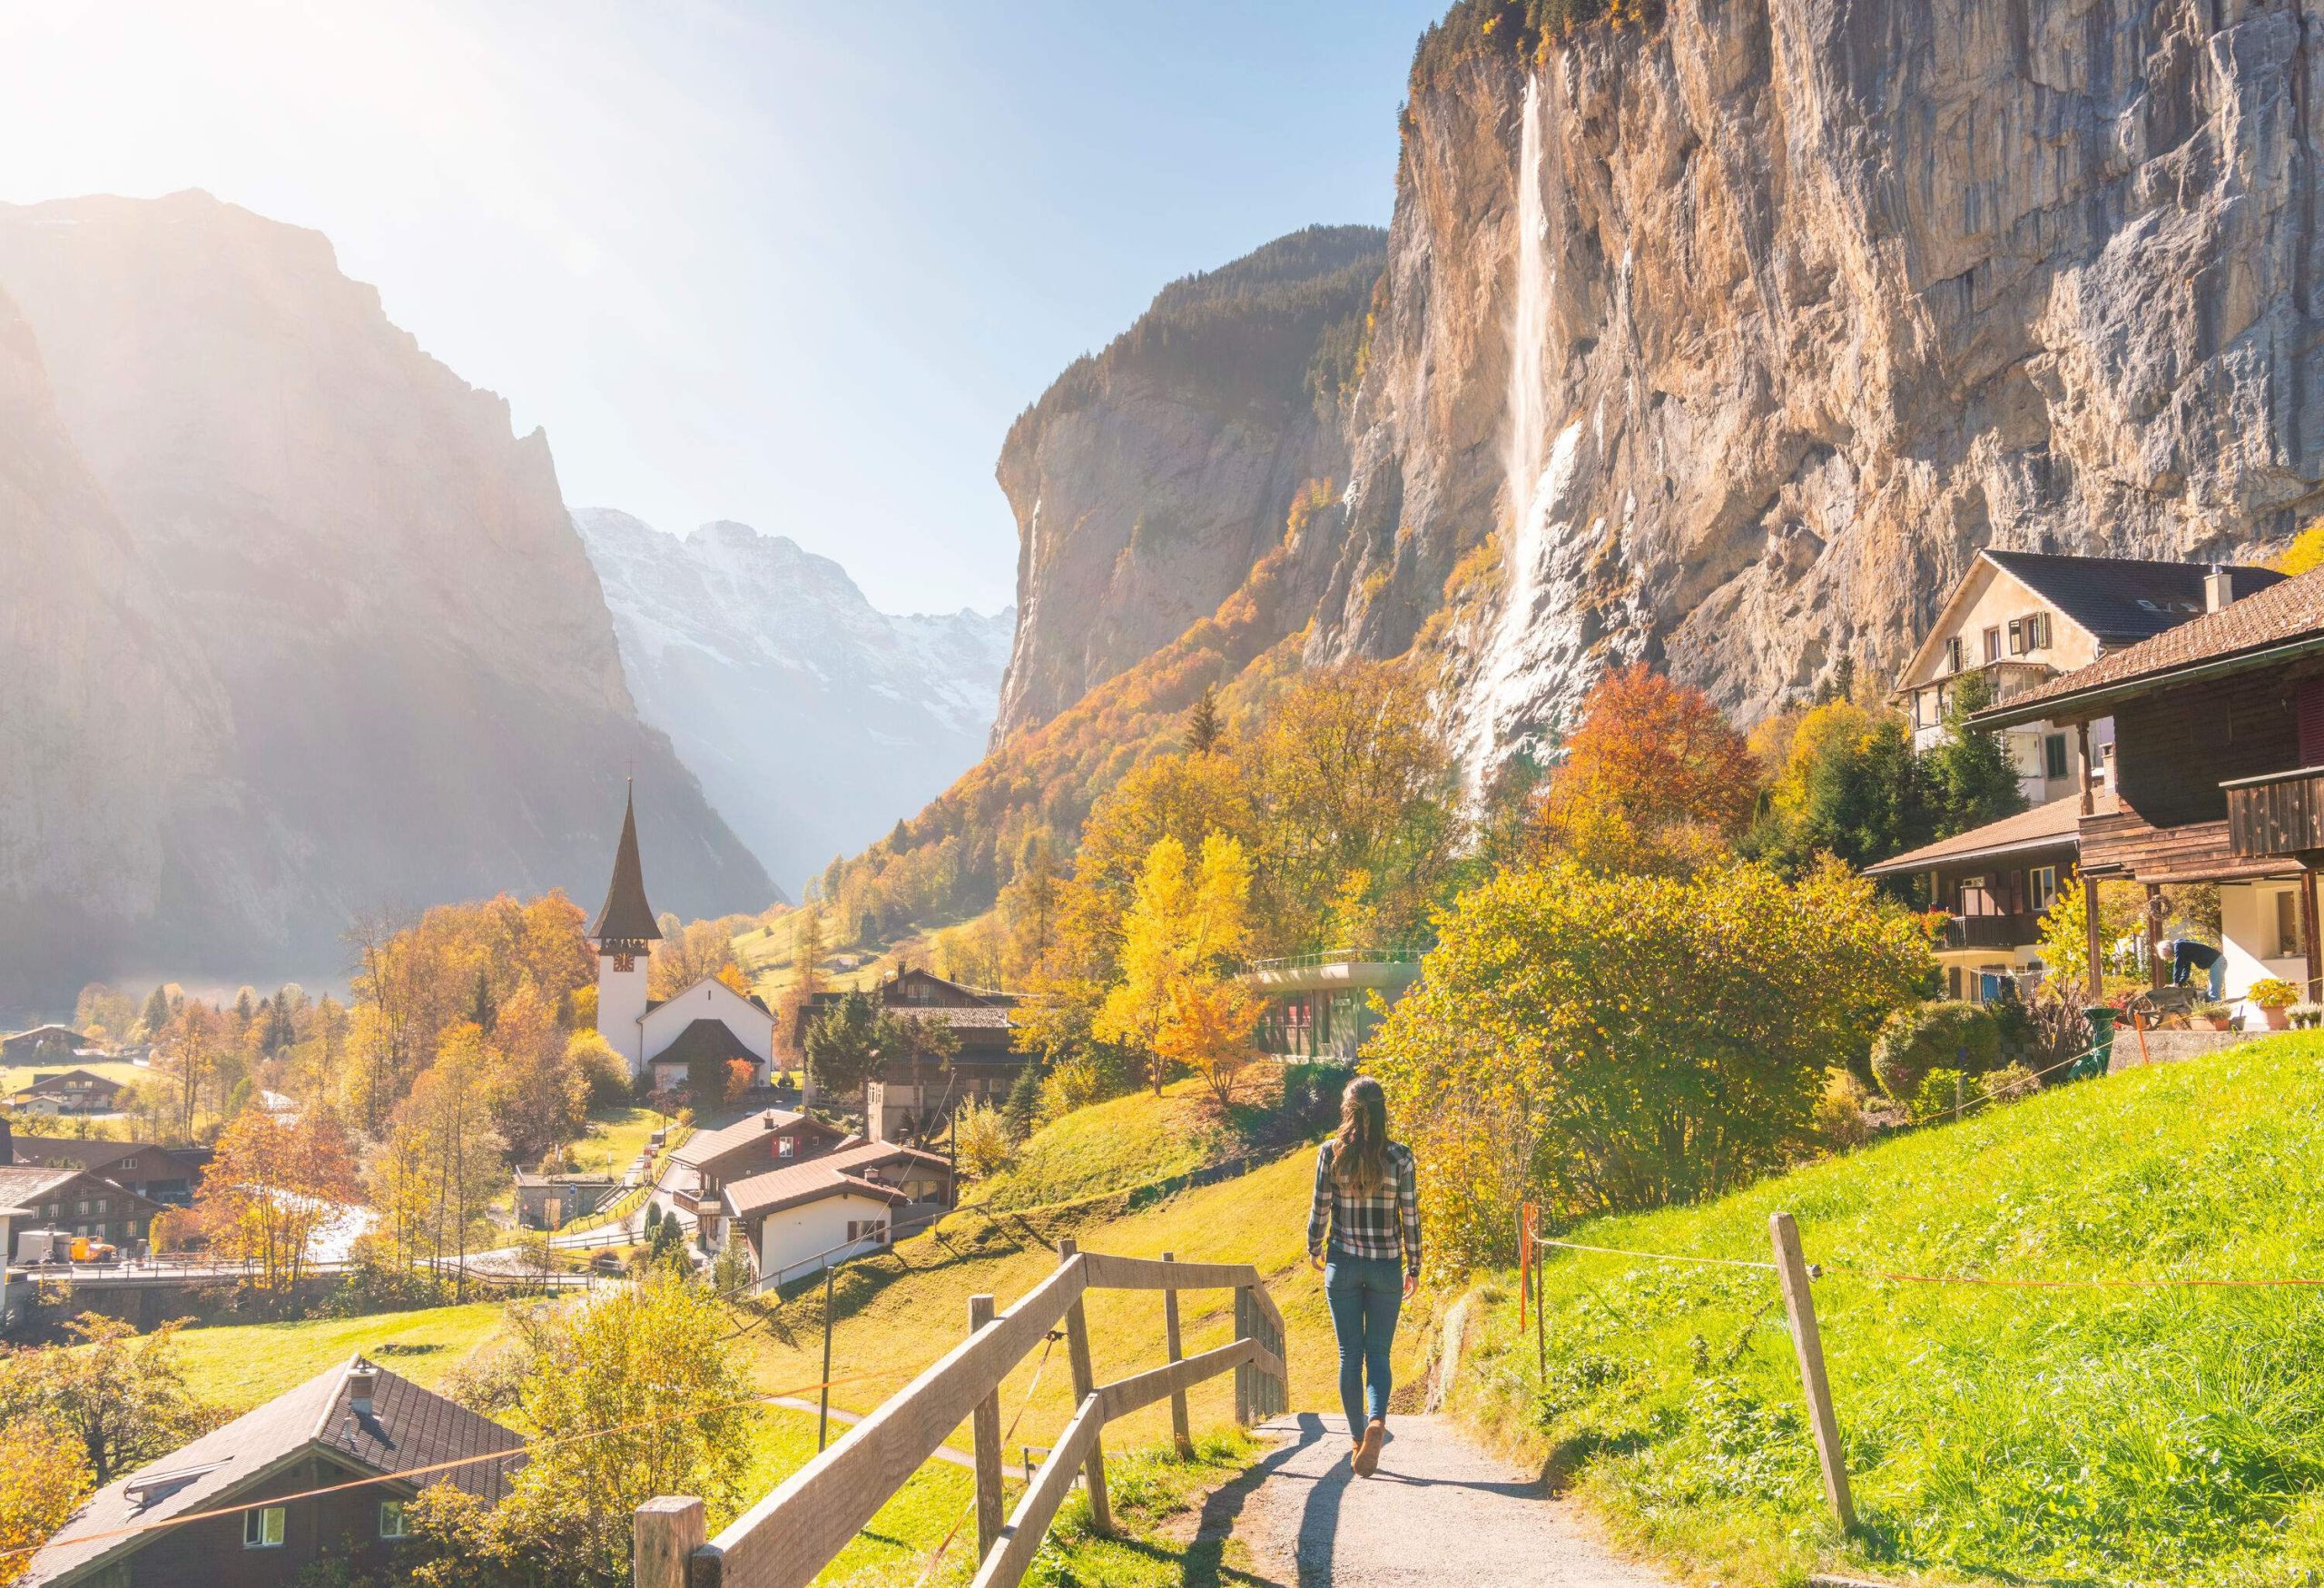 A person walks along a scenic path through a picturesque village nestled among steep cliffs, basking in the warm sunlight and taking in the breathtaking natural beauty of their surroundings.